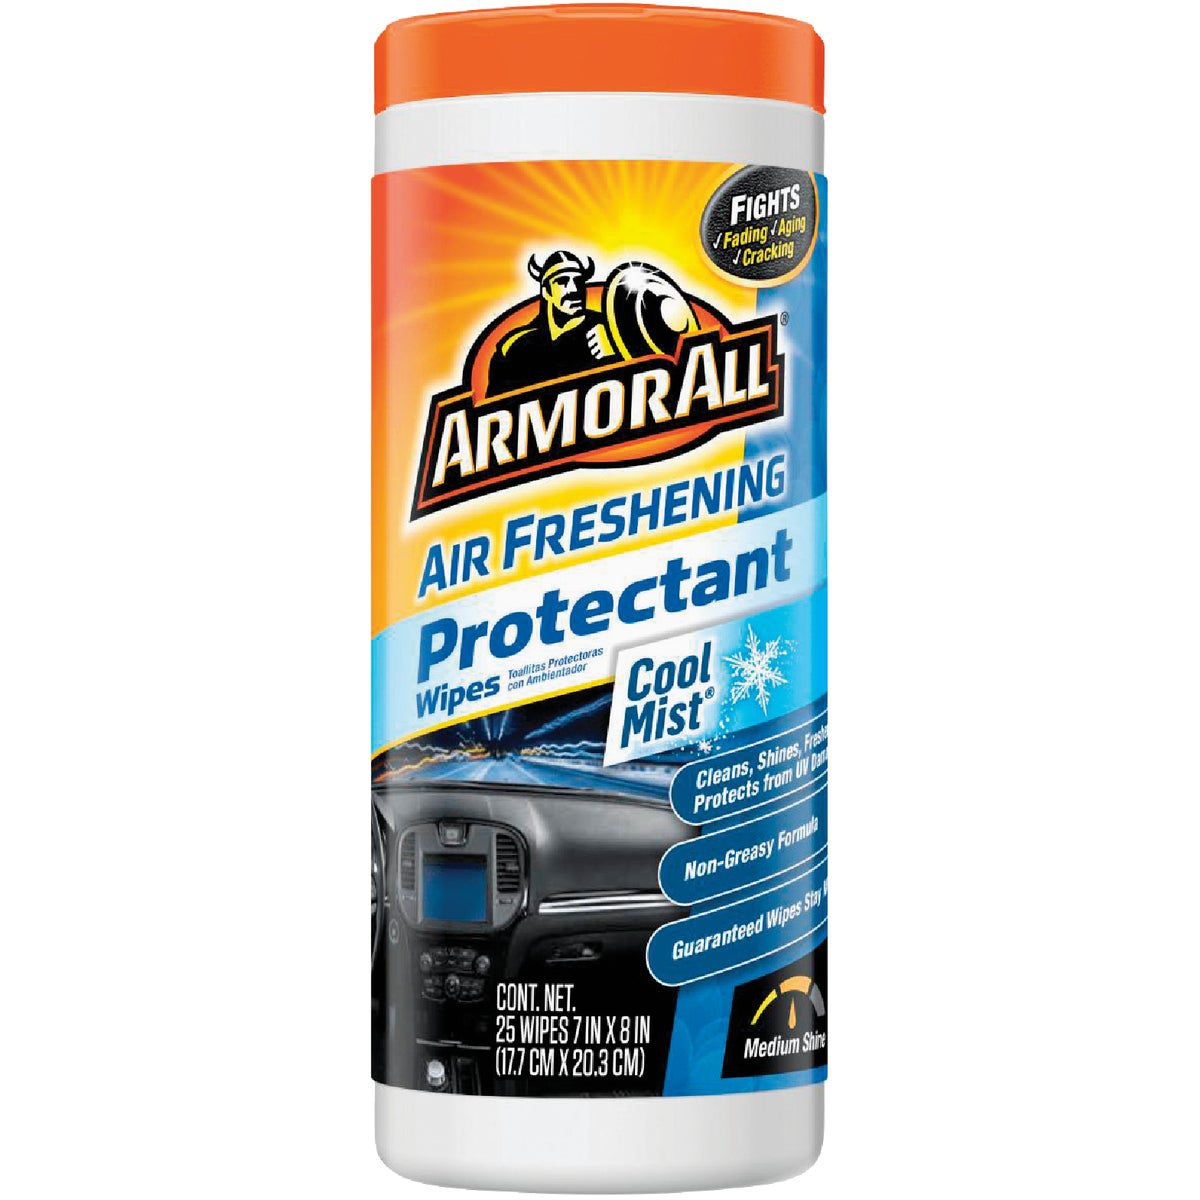 Armor All Cool Mist Scent Air Freshening Protectant Wipe (25